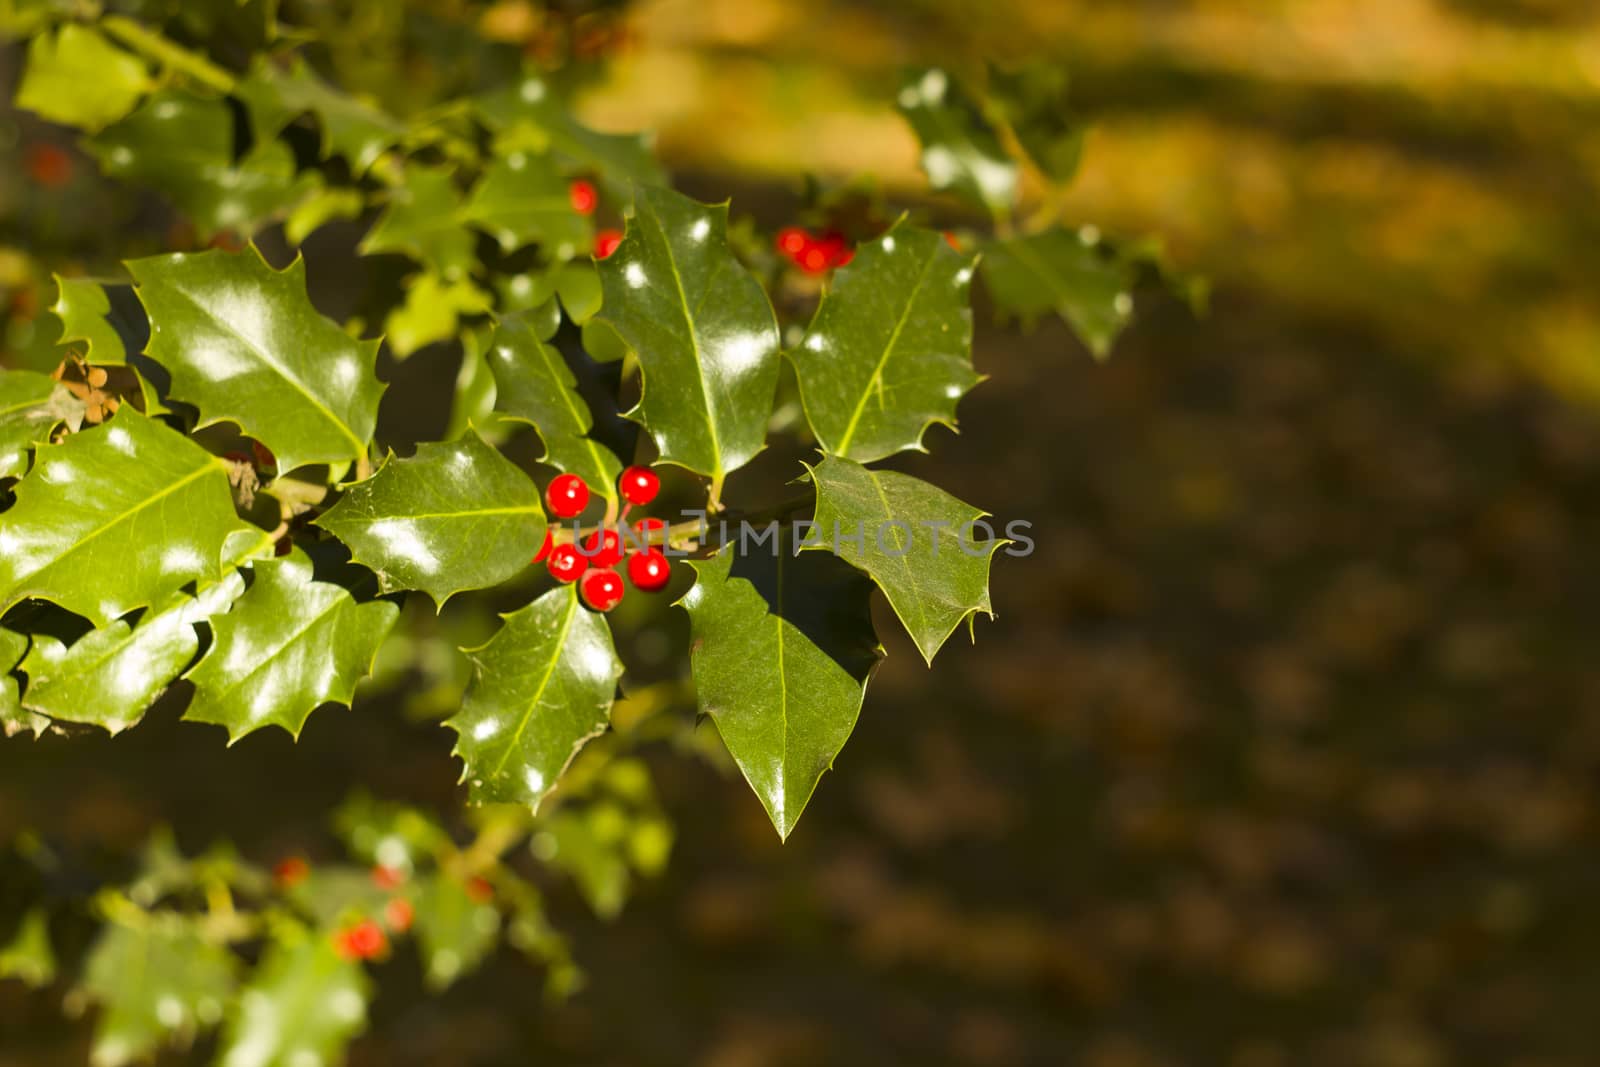 Holly Tree background for Chritsmas Cards